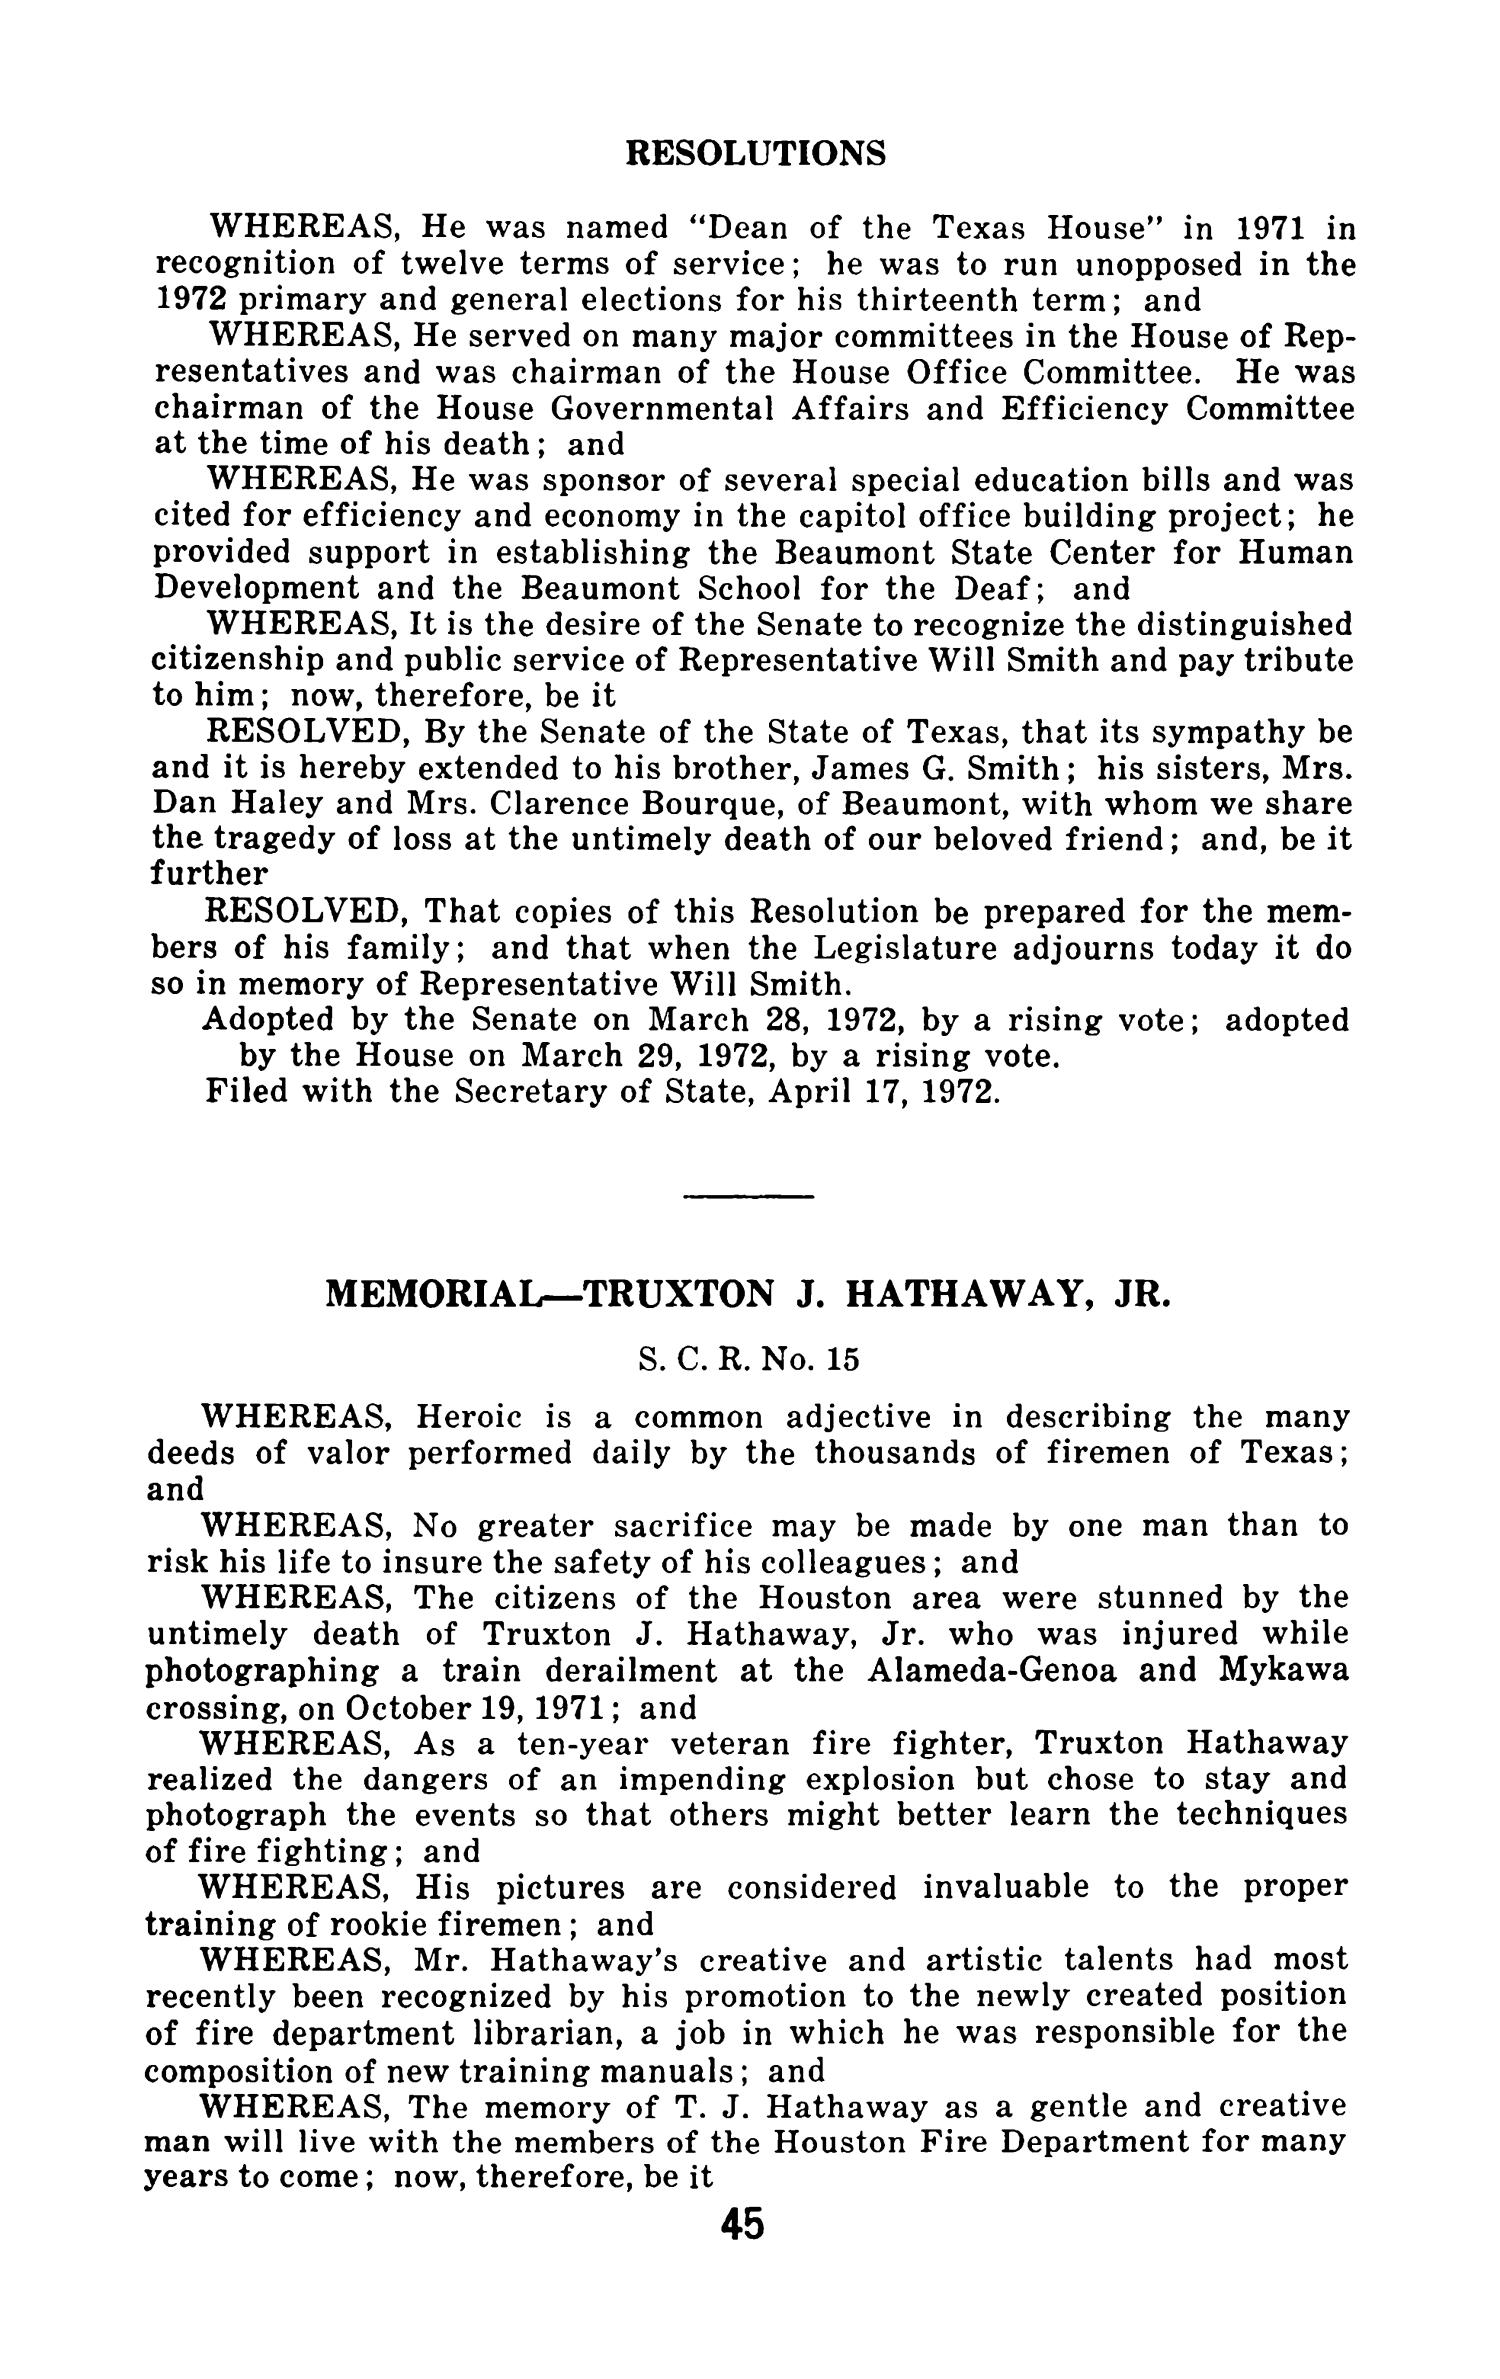 General and Special Laws of The State of Texas Passed By The Second, Third and Fourth Called Sessions of the Sixty-Second Legislature and the Regular Session of the Sixty-Third Legislature
                                                
                                                    45
                                                